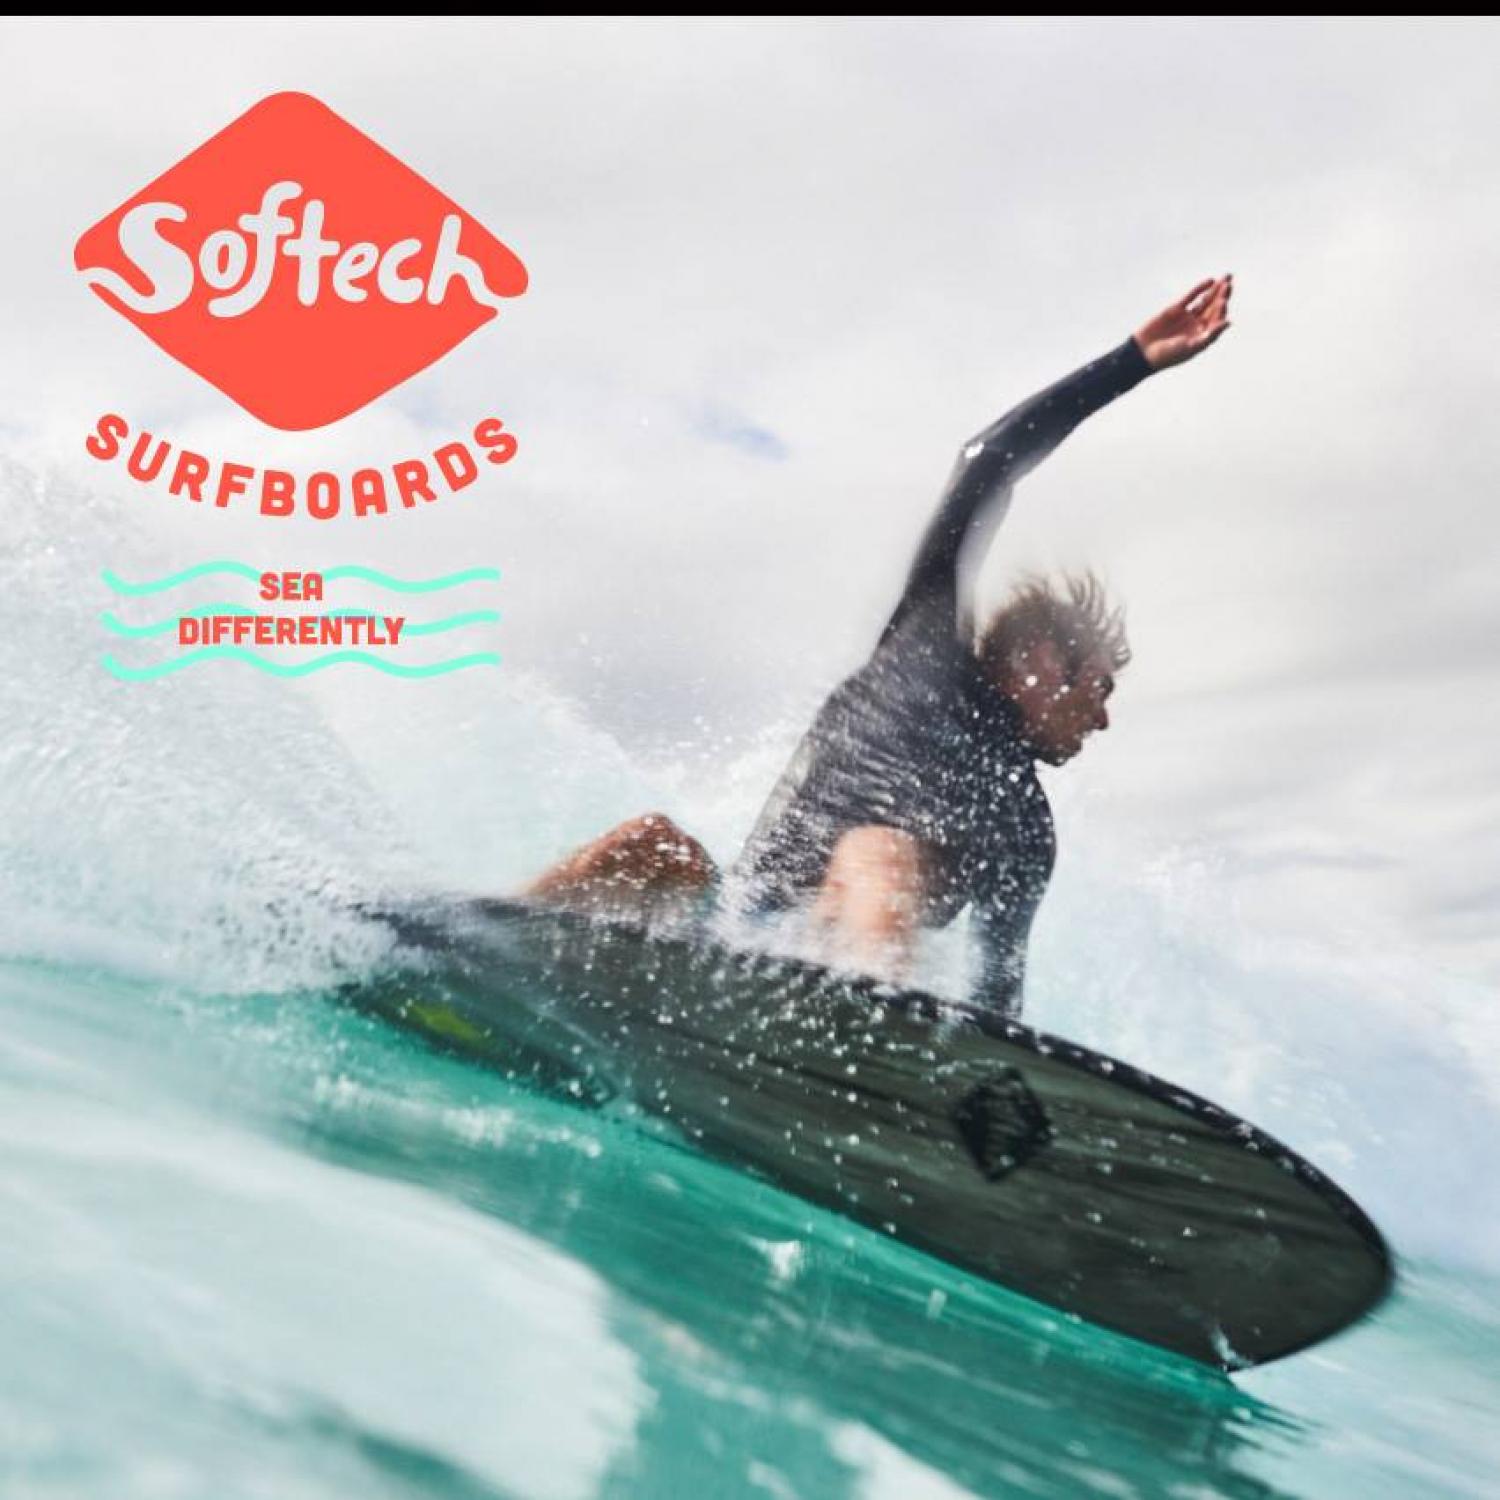 Softech Surfboards 入荷予定のお知らせ